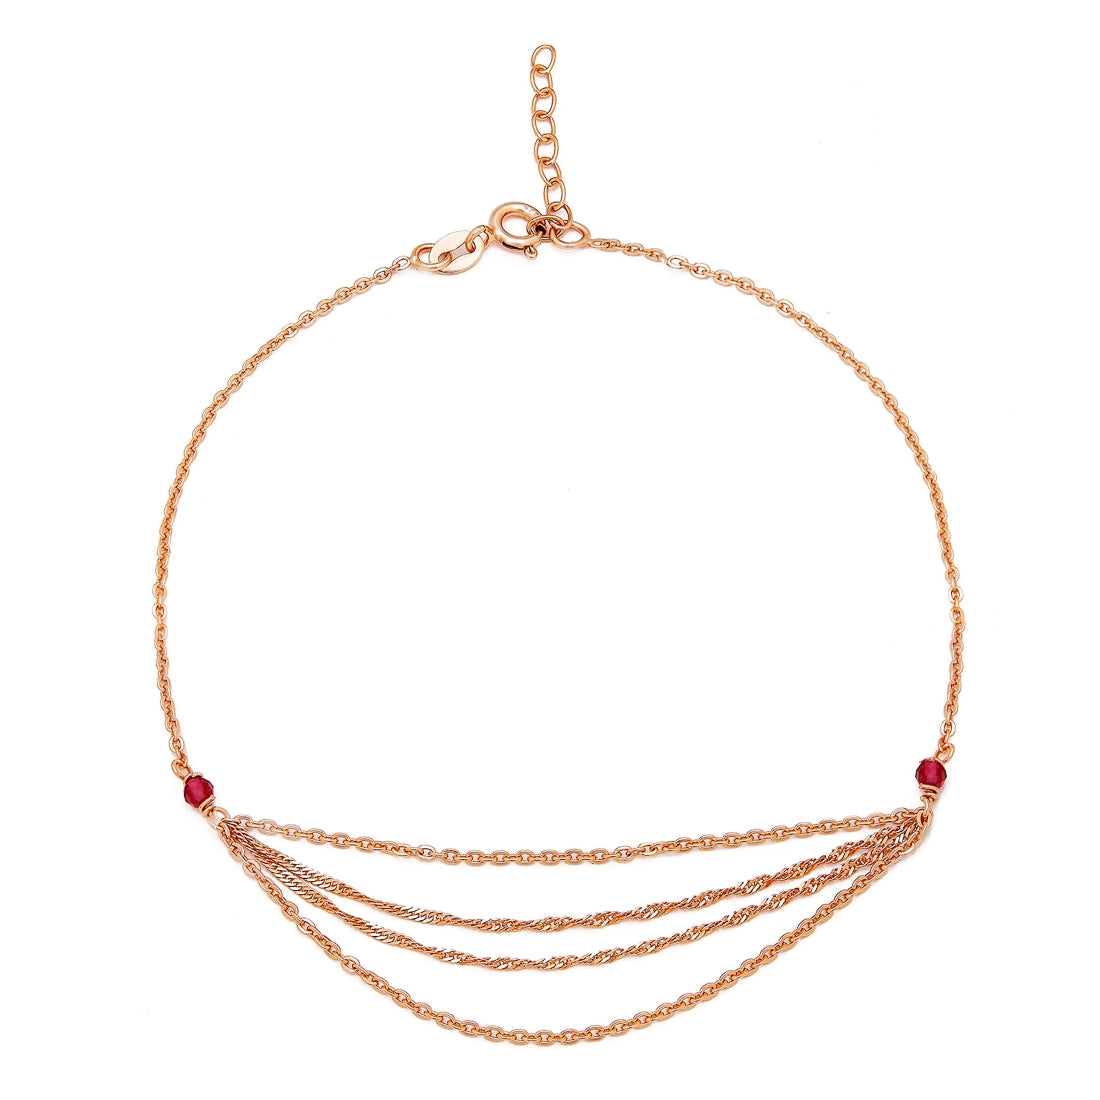 Chic Links Rose Gold-Plated 925 Sterling Silver Anklet